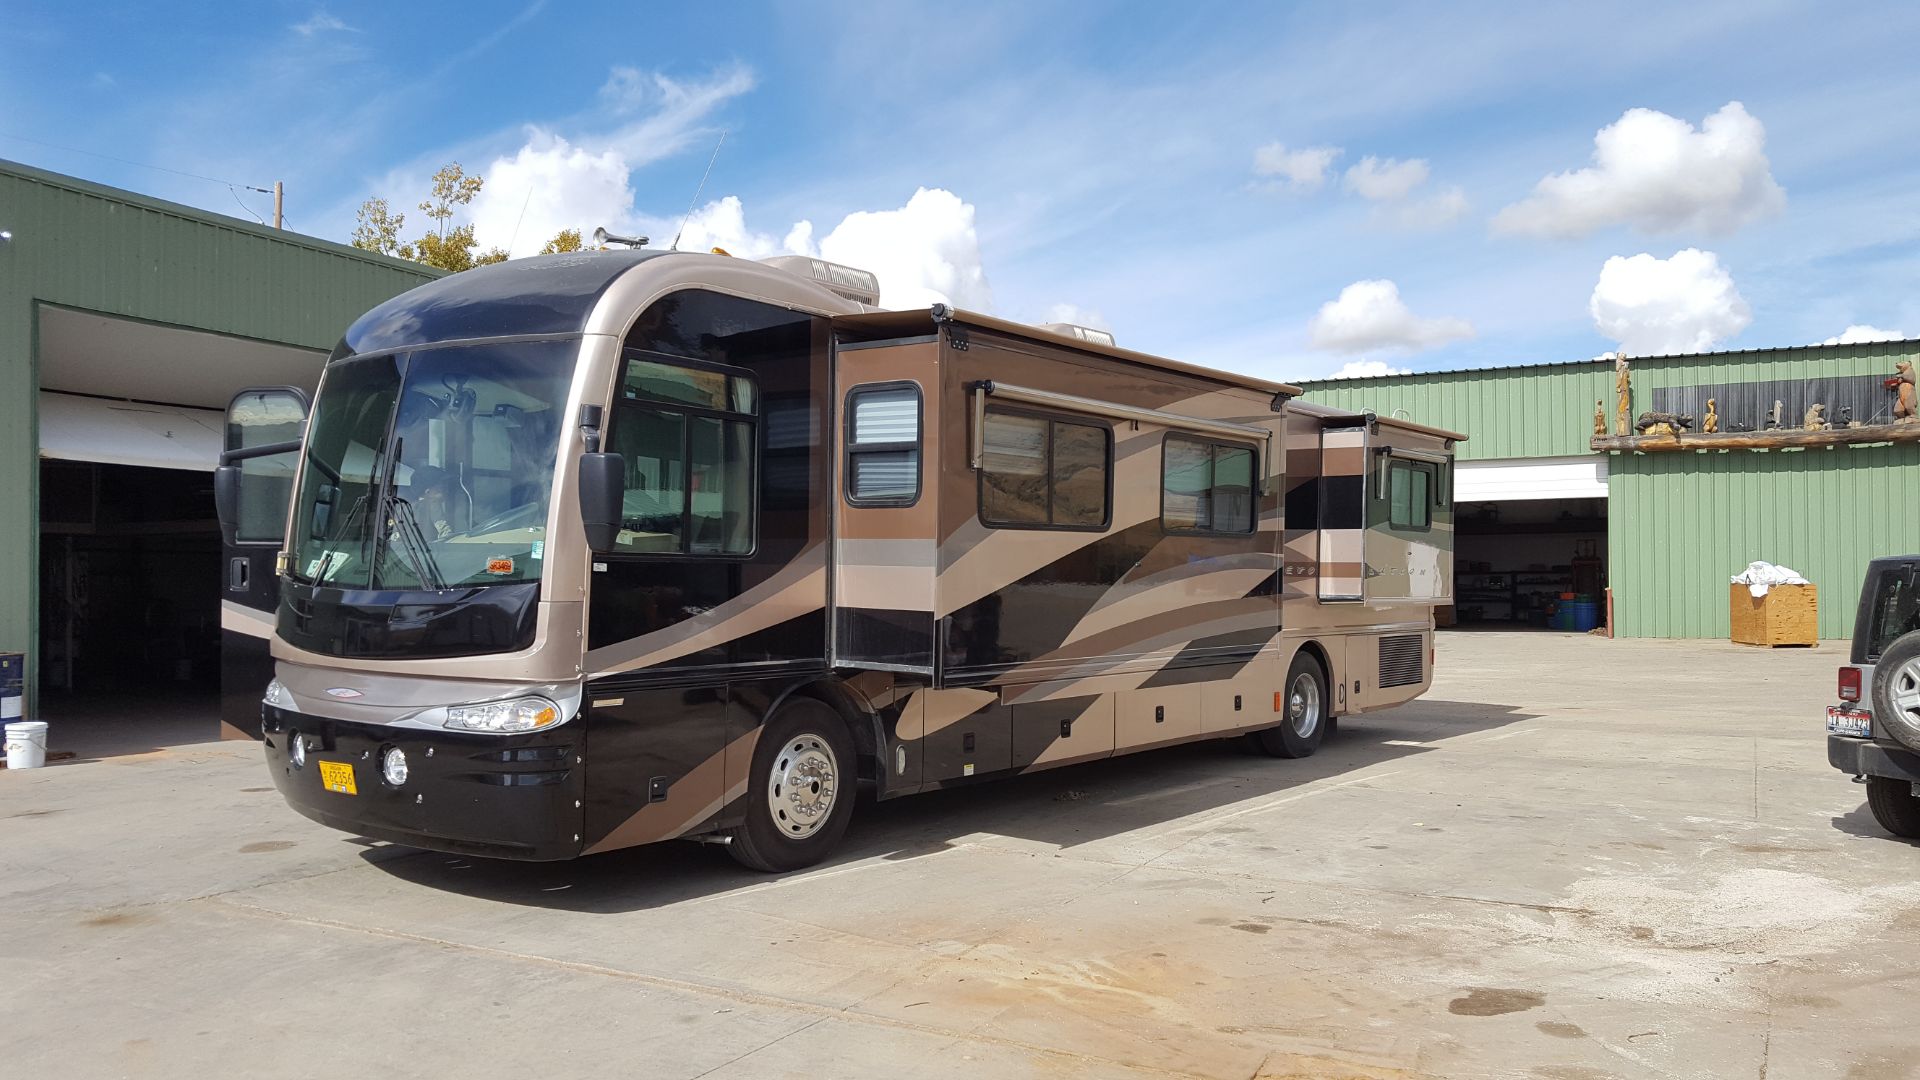 2003 Fleetwood Revolution 38B Double Slide-Out Diesel Pusher.  This coach is built on a Freightliner